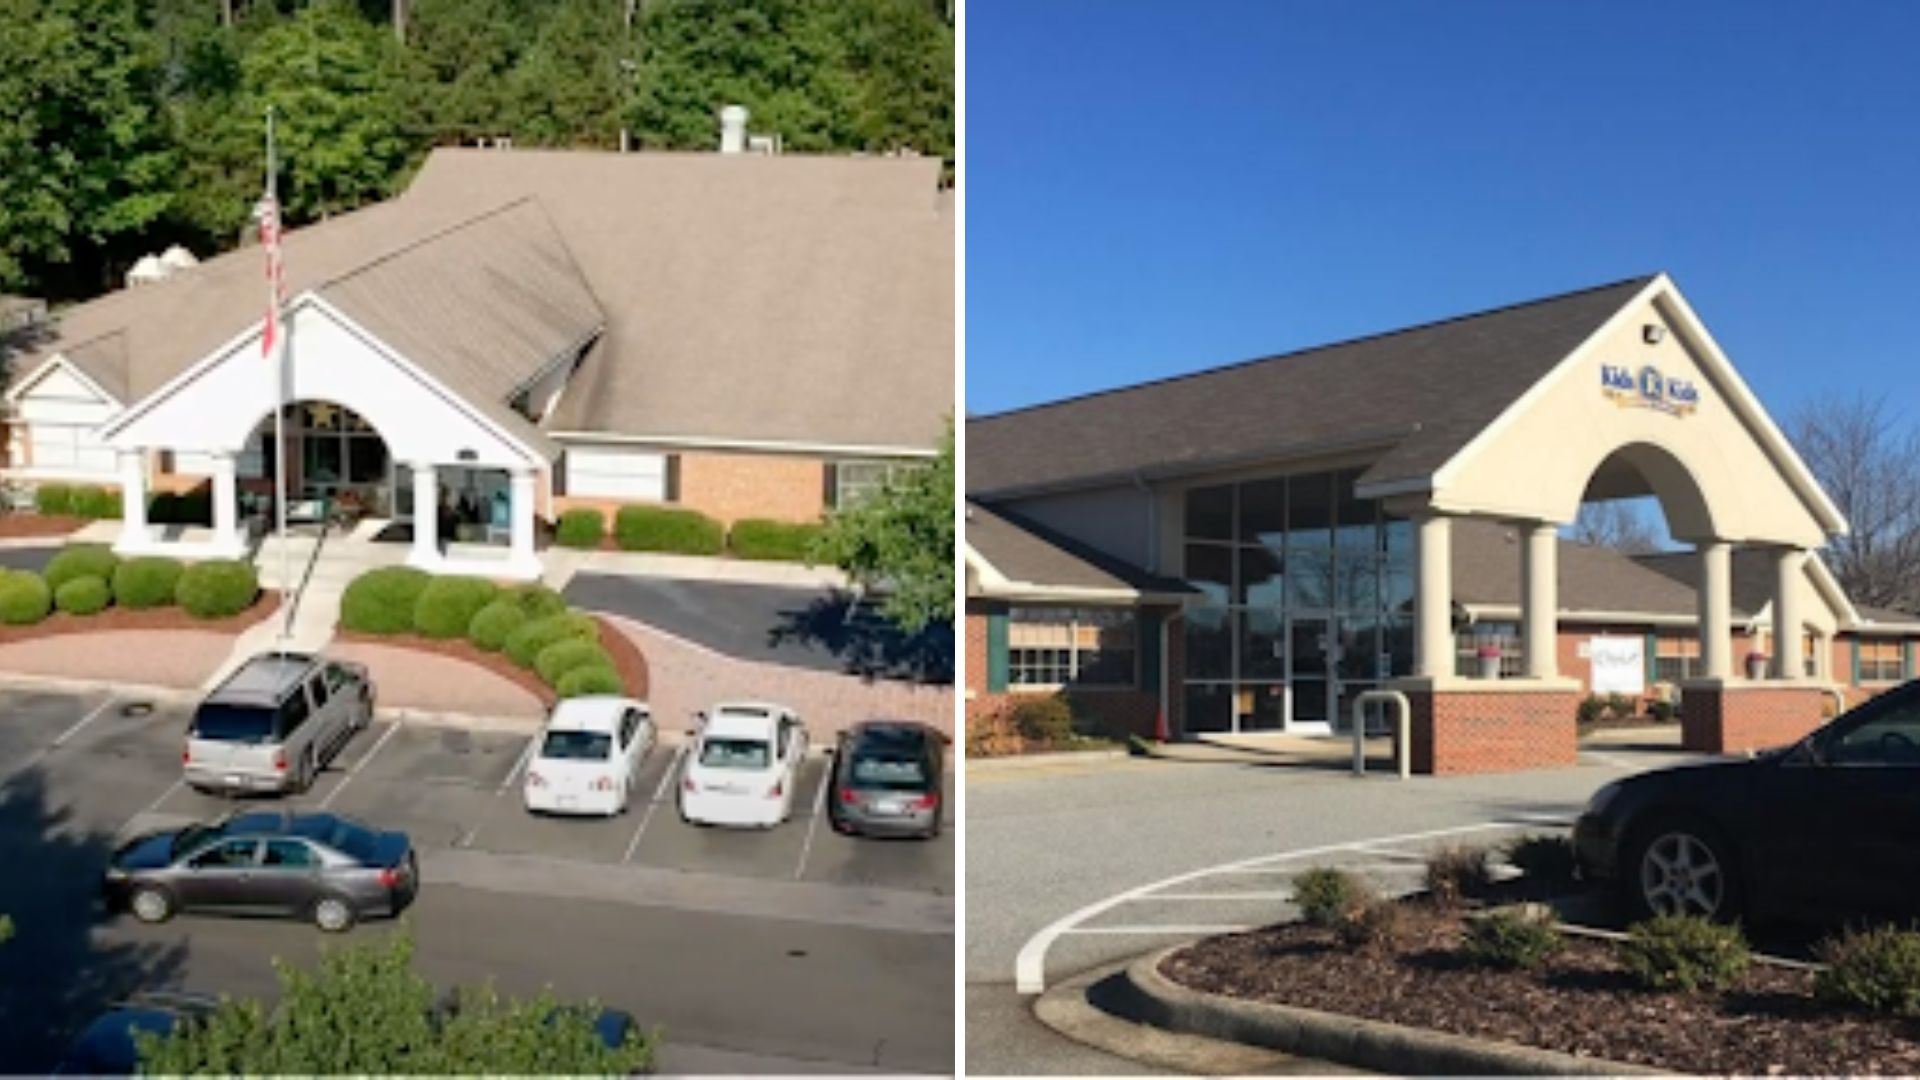 Two Education Centers Leased to: Endeavor Schools $10,137,166 North Carolina Acquired in June 2022 in partnership with Freeport Equity Currently active in our portfolio